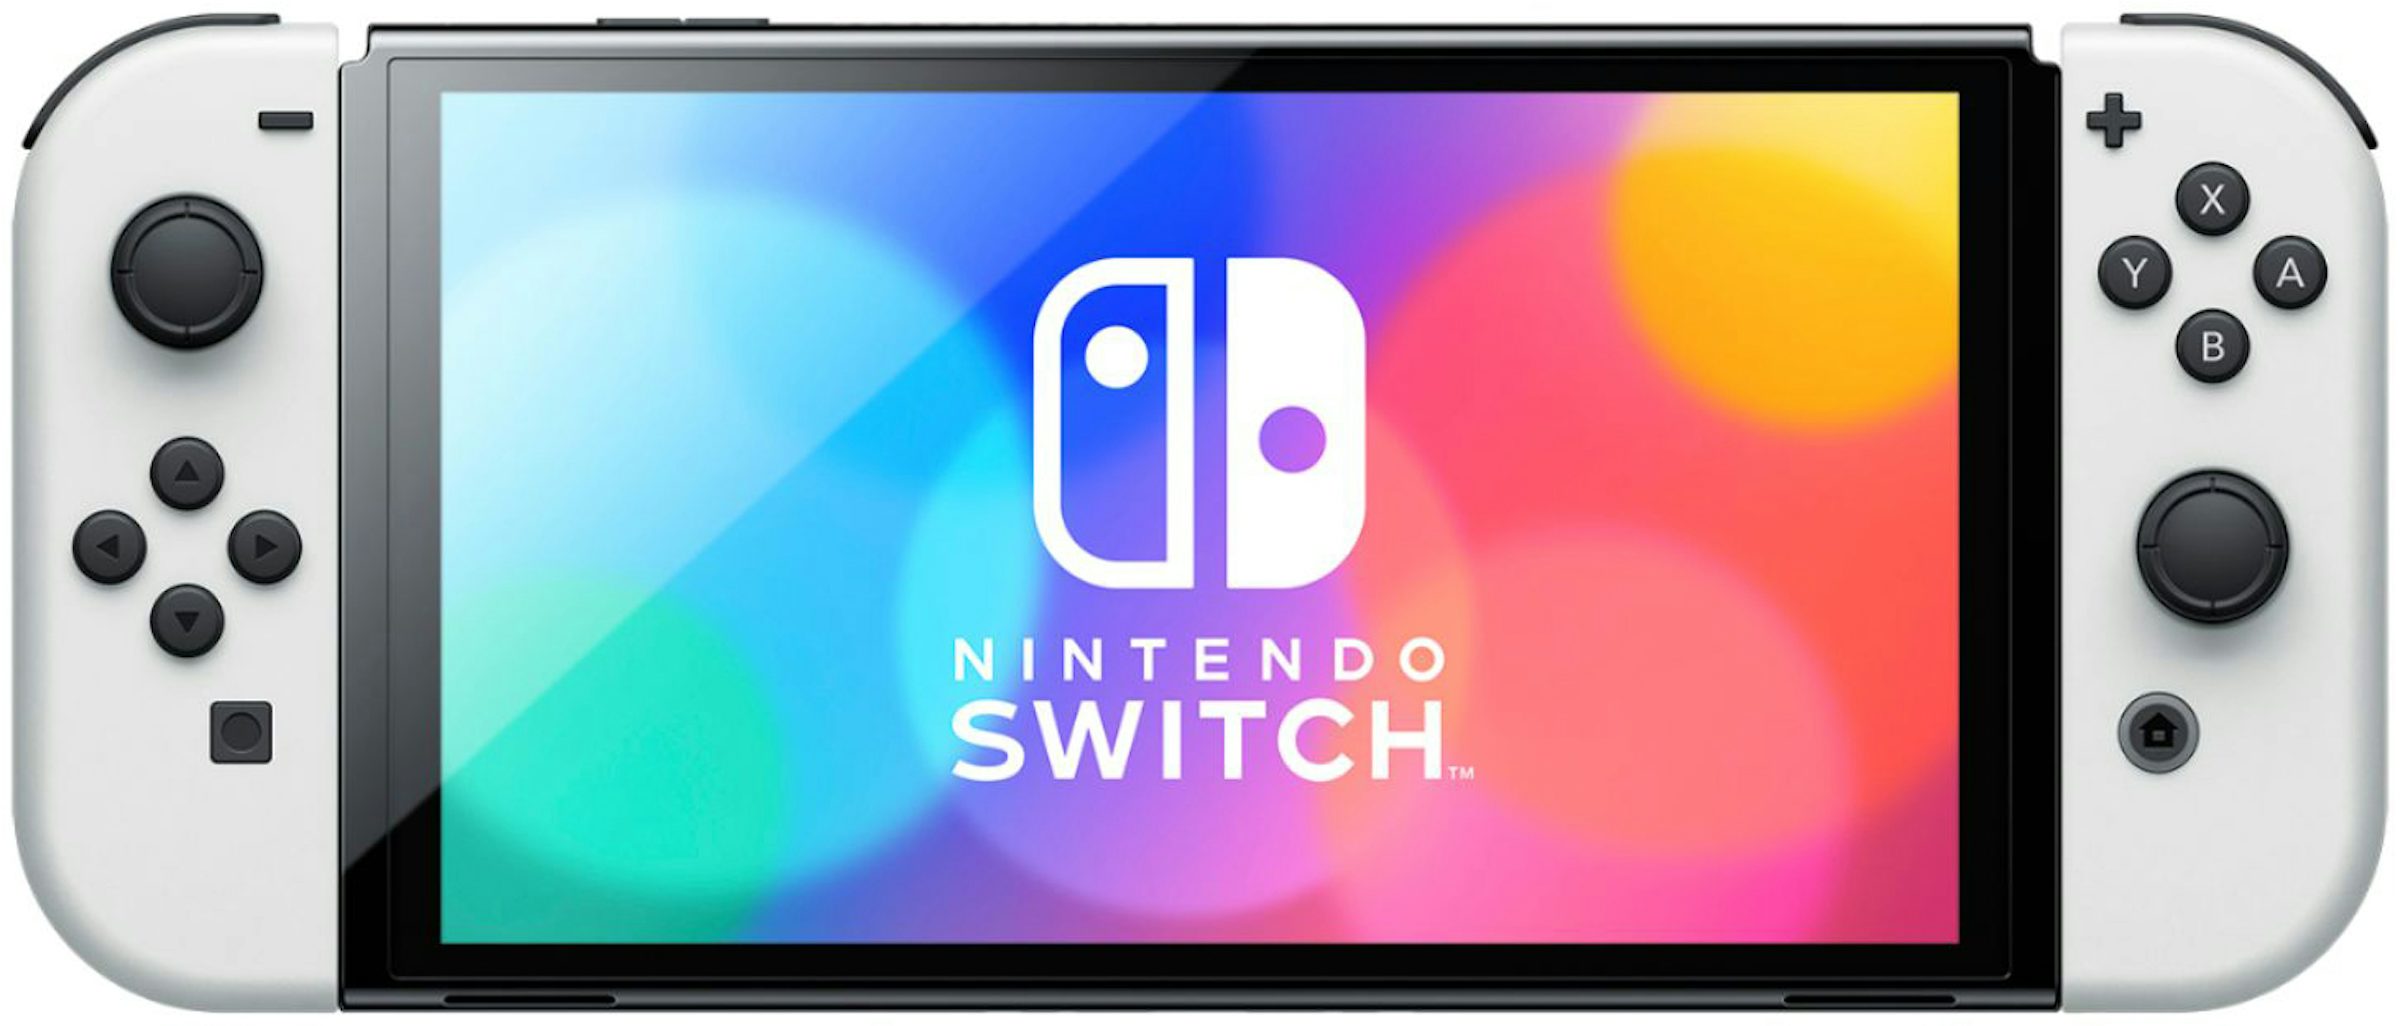 Questions and Answers: Nintendo Switch – OLED Model: Pokémon Scarlet &  Violet Edition Multi HEGSKEAAA - Best Buy